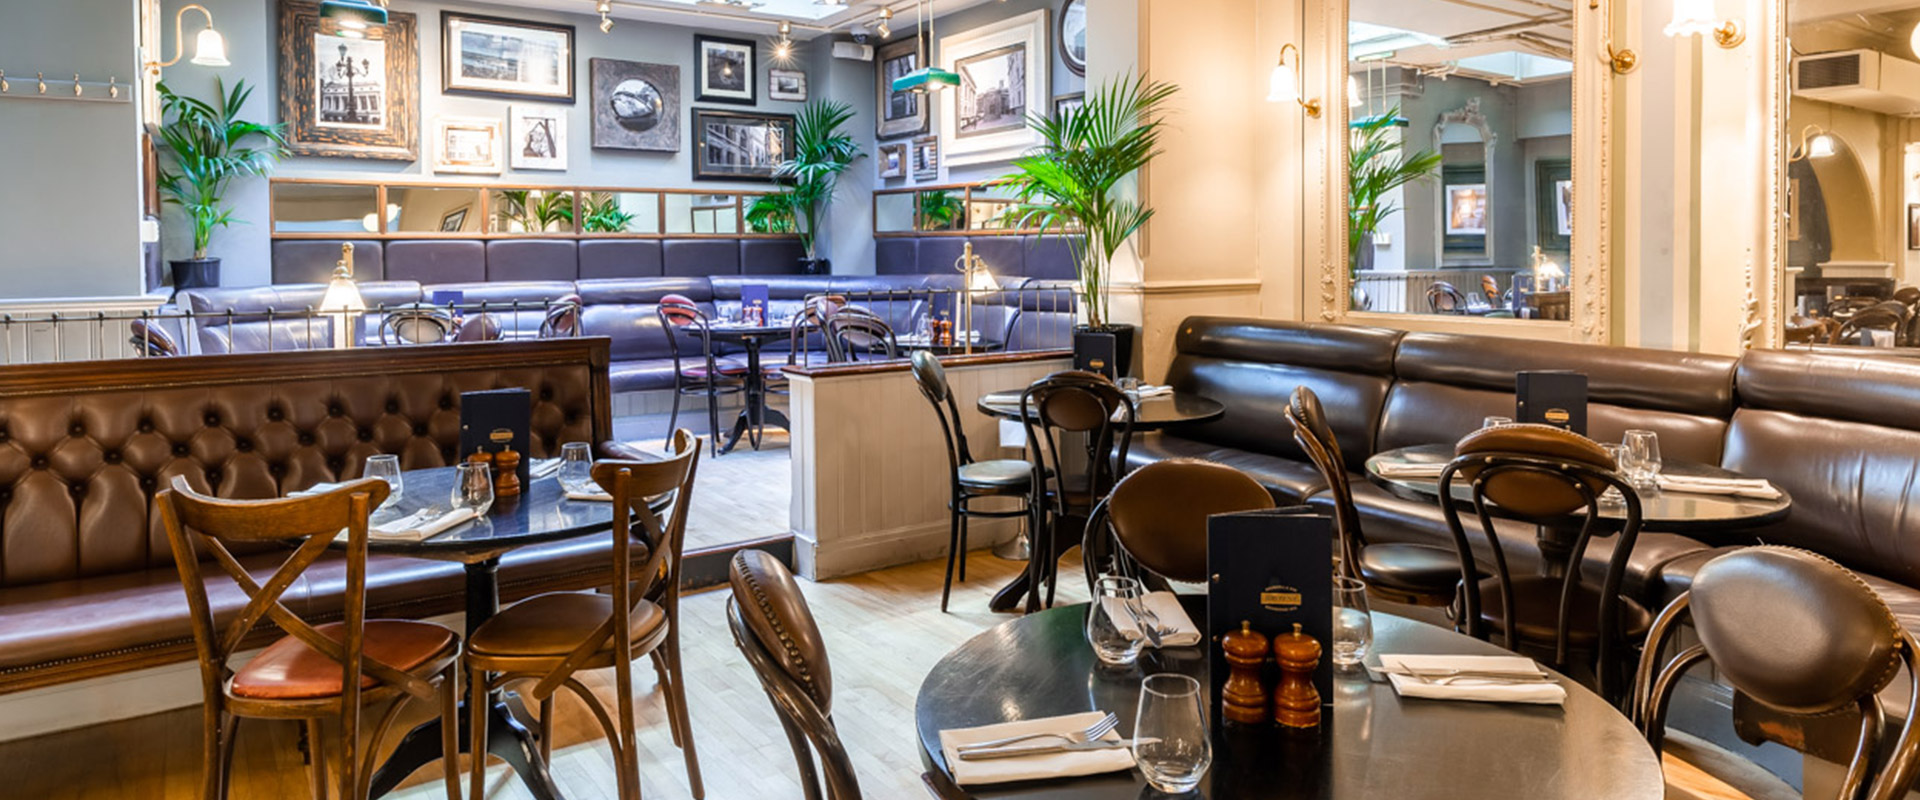 Private Dining Room Covent Garden : The 12 Best Private Dining Venues For Hire In Covent Garden - Our opulent yet relaxed interiors are inspired by our love of the ocean, the perfect location to wow your guests.